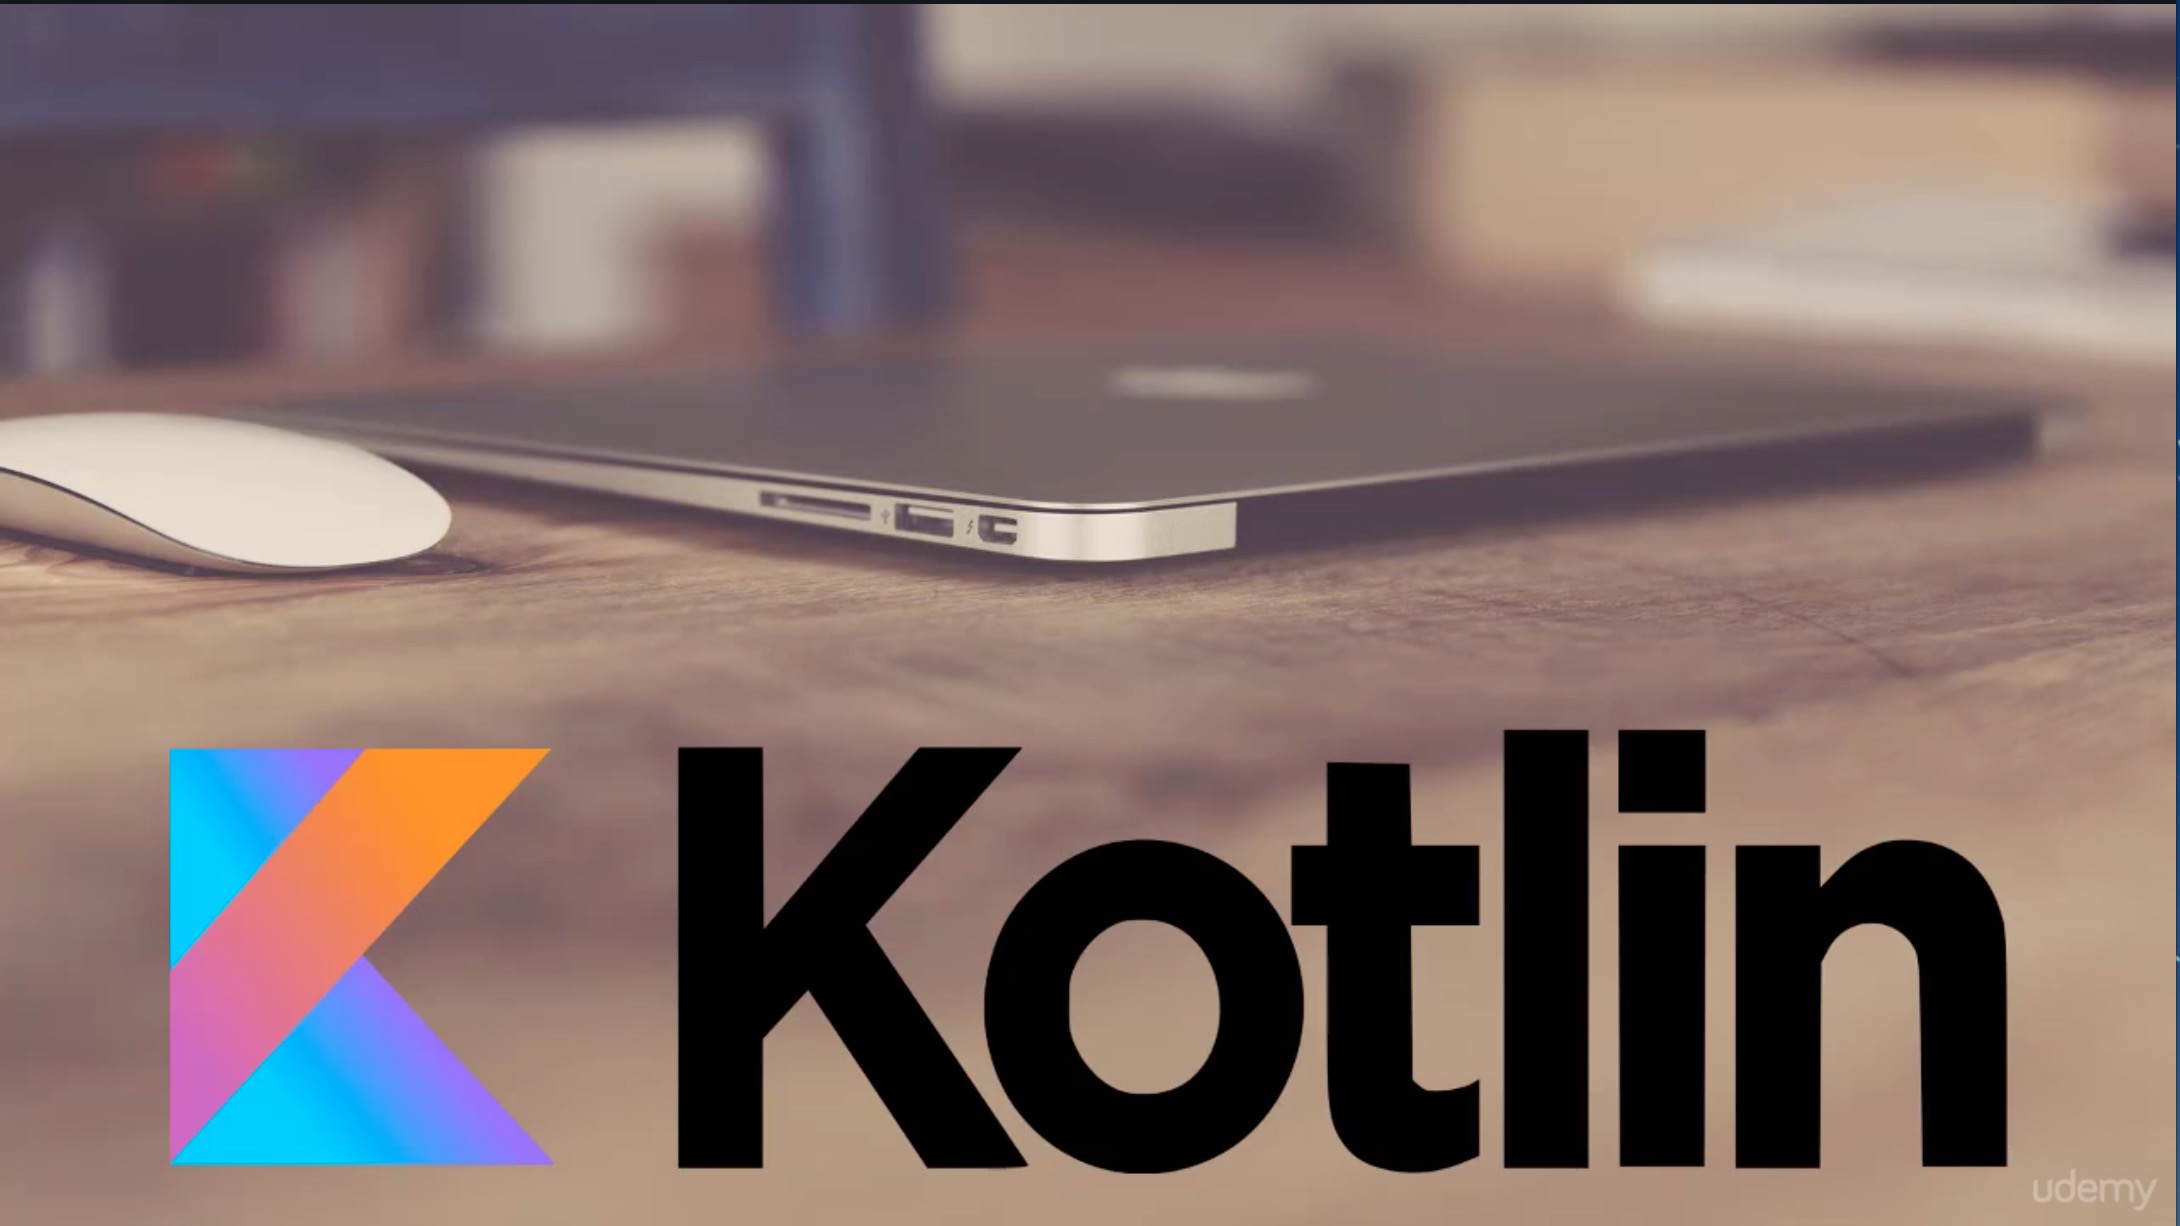 kotlin for each with index